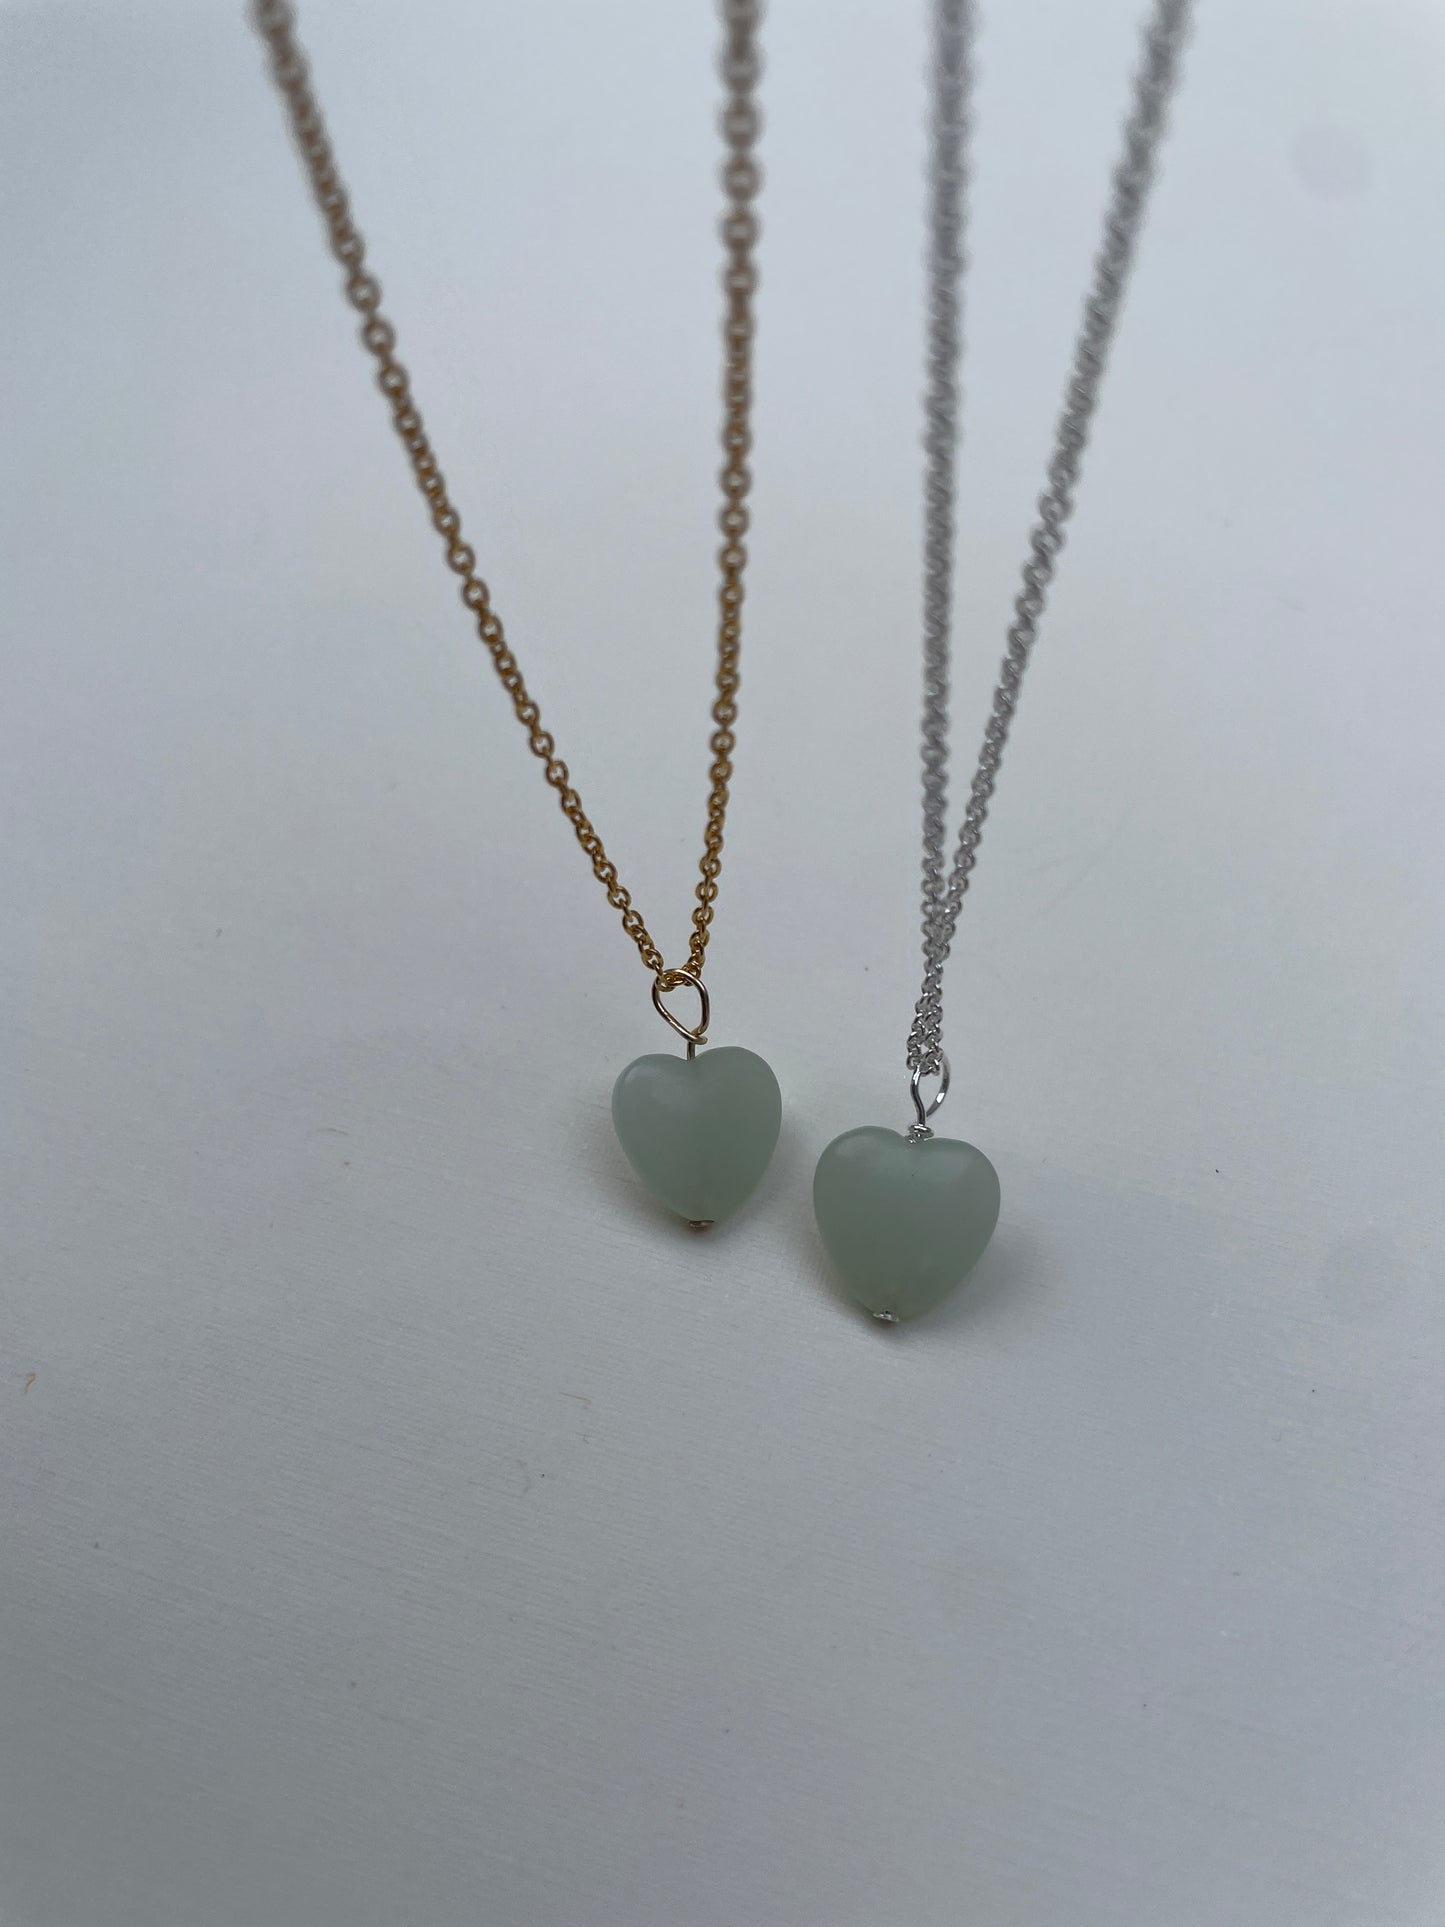 New Jade Charmed Necklace